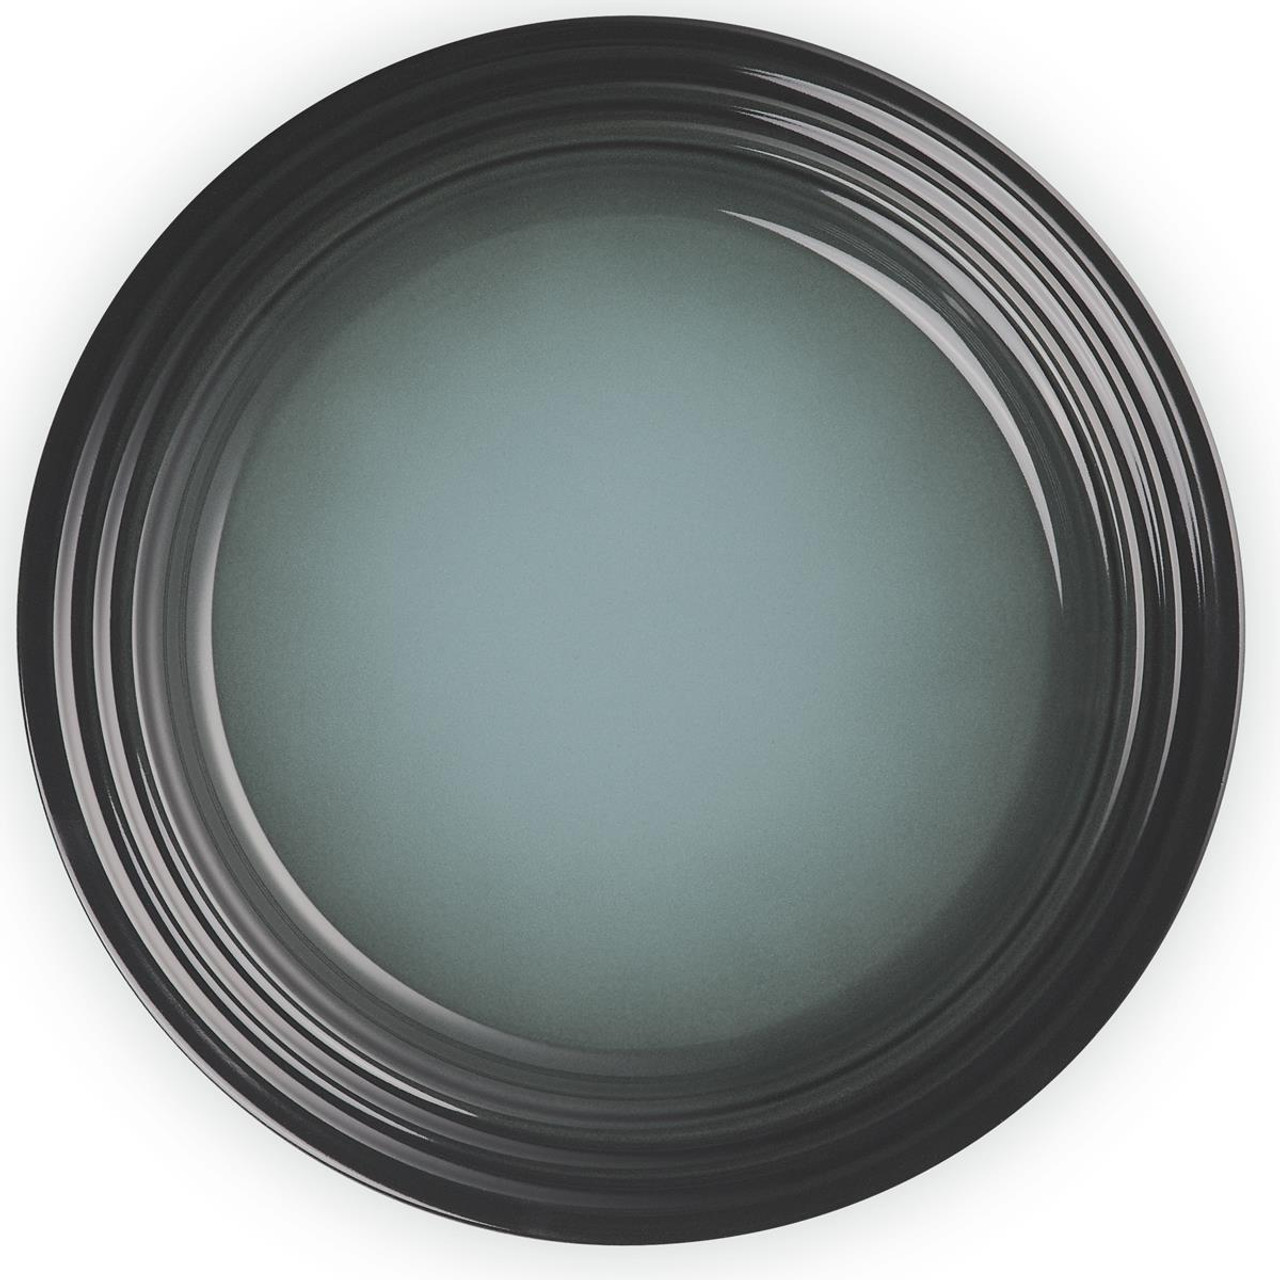 Hot sale - Sale Le Creuset Side Plate at discount 68% in 2023